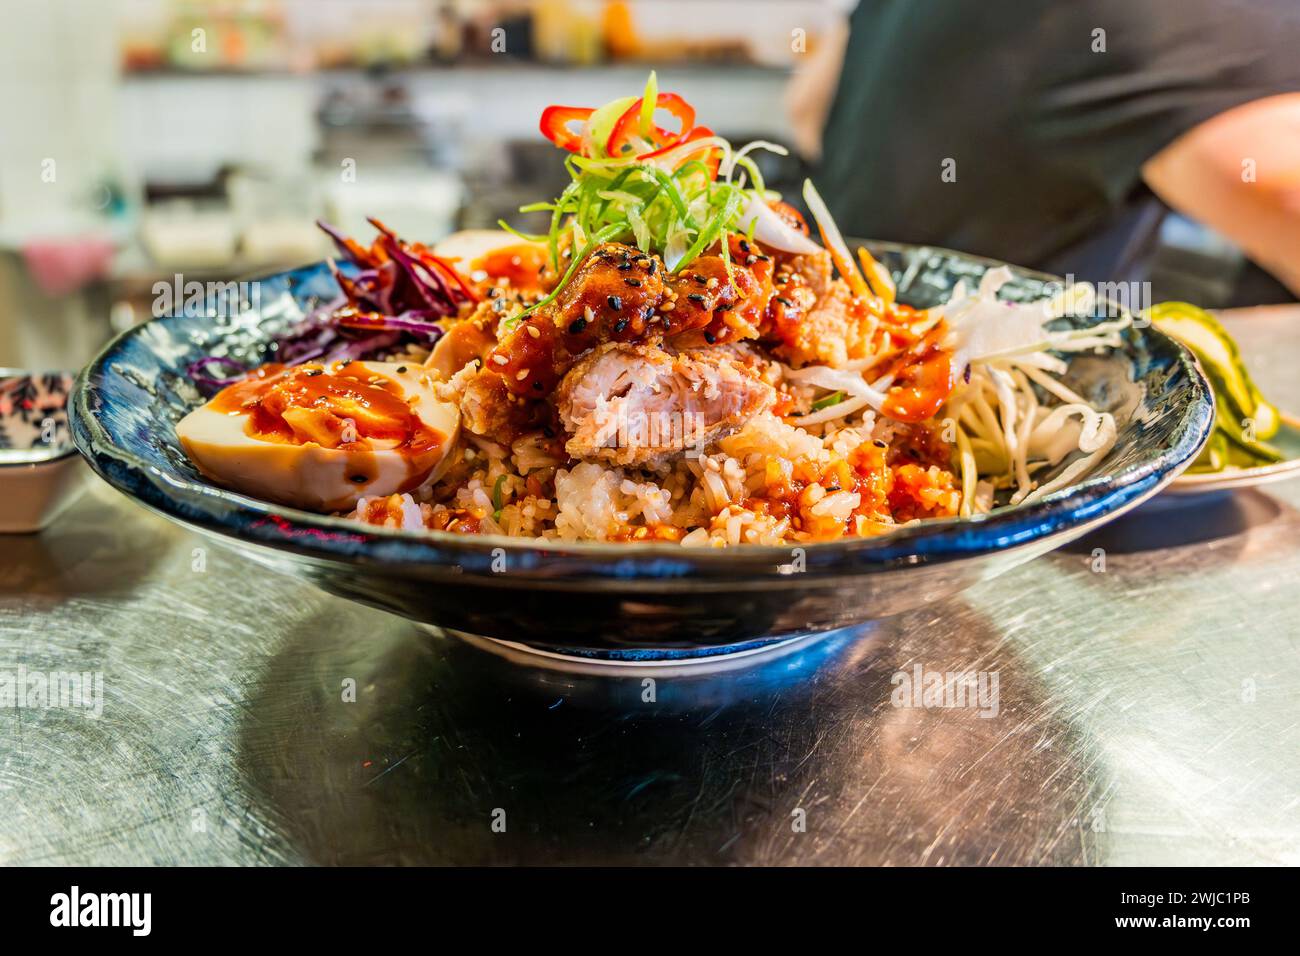 Sweet and sour asian bowl with chicken, shrimp, seed, egg and vegetable in blue bowl on table, part of man. Stock Photo